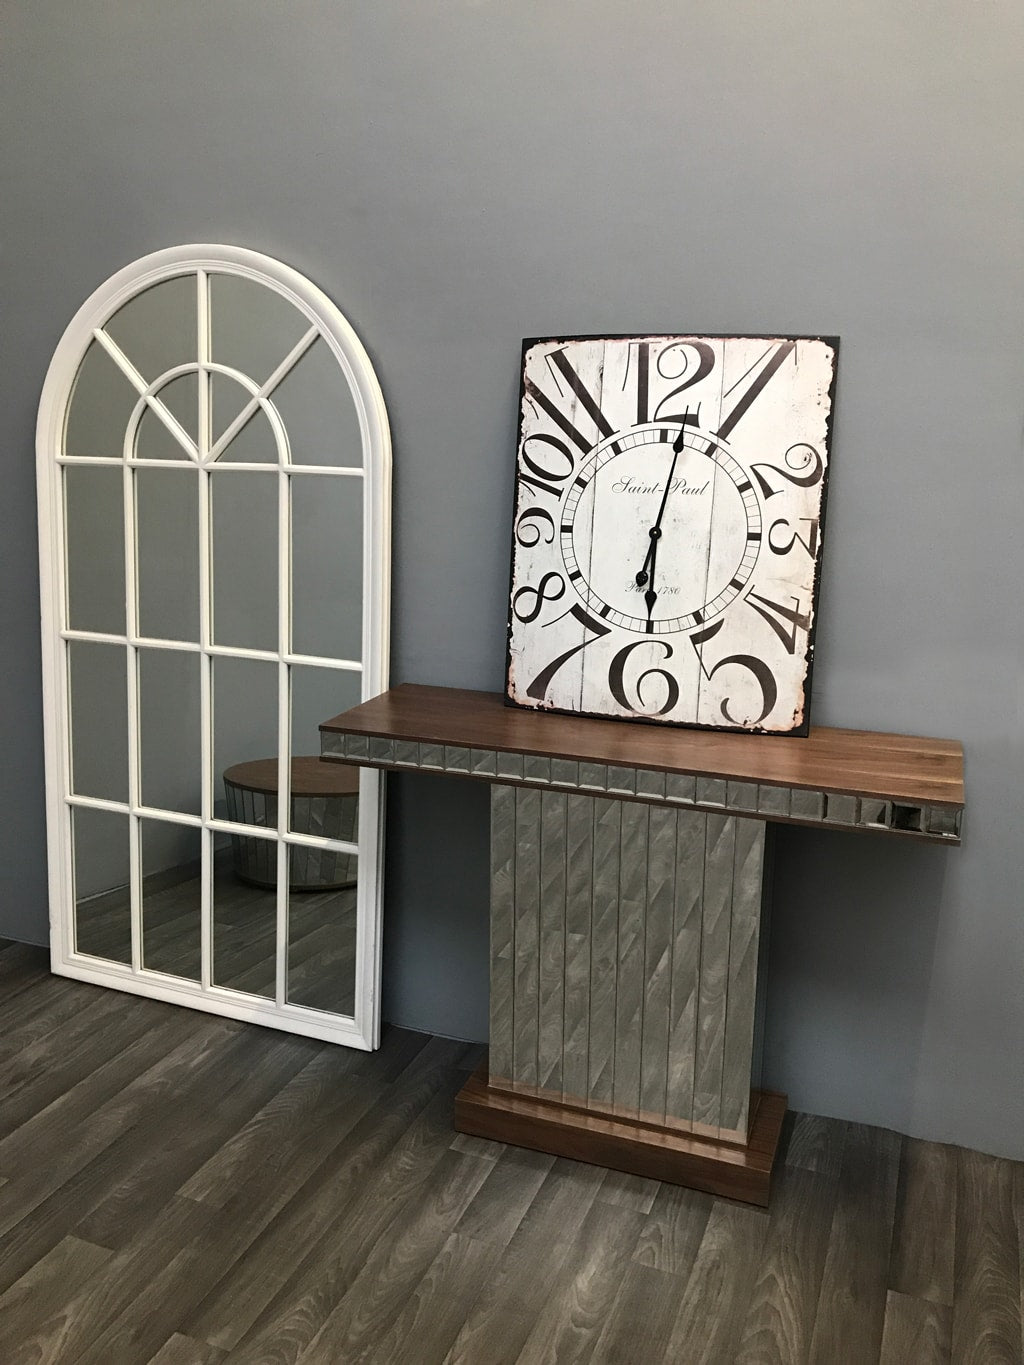 Mirrored Console Table with Walnut Wooden Top arranged with wall clock on top standing to a white window mirror on the left